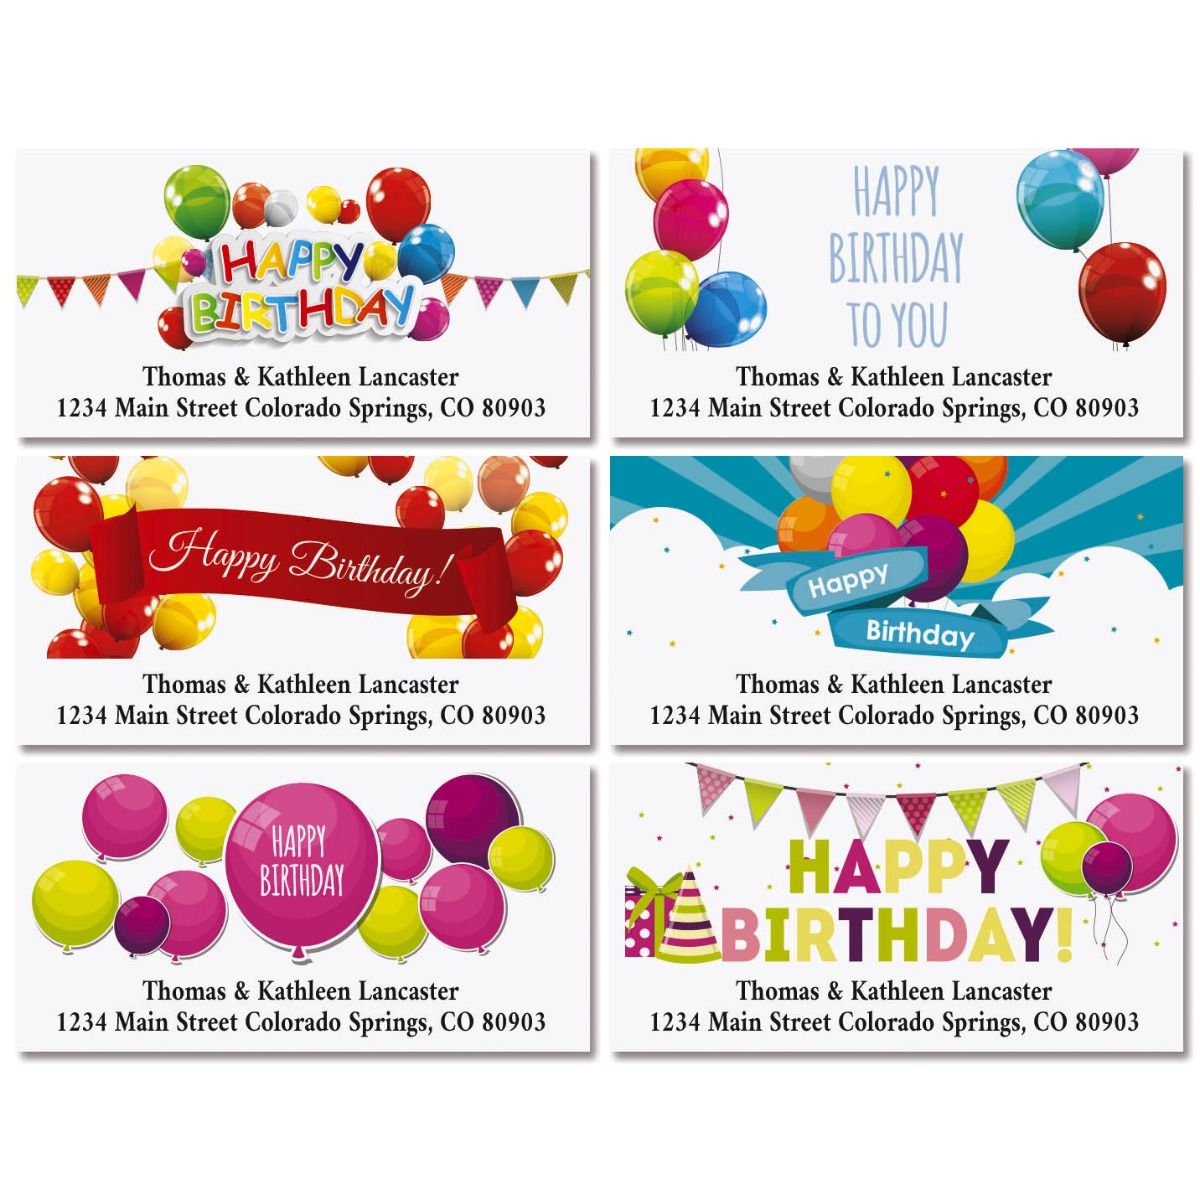 happy-birthday-deluxe-address-labels-colorful-images